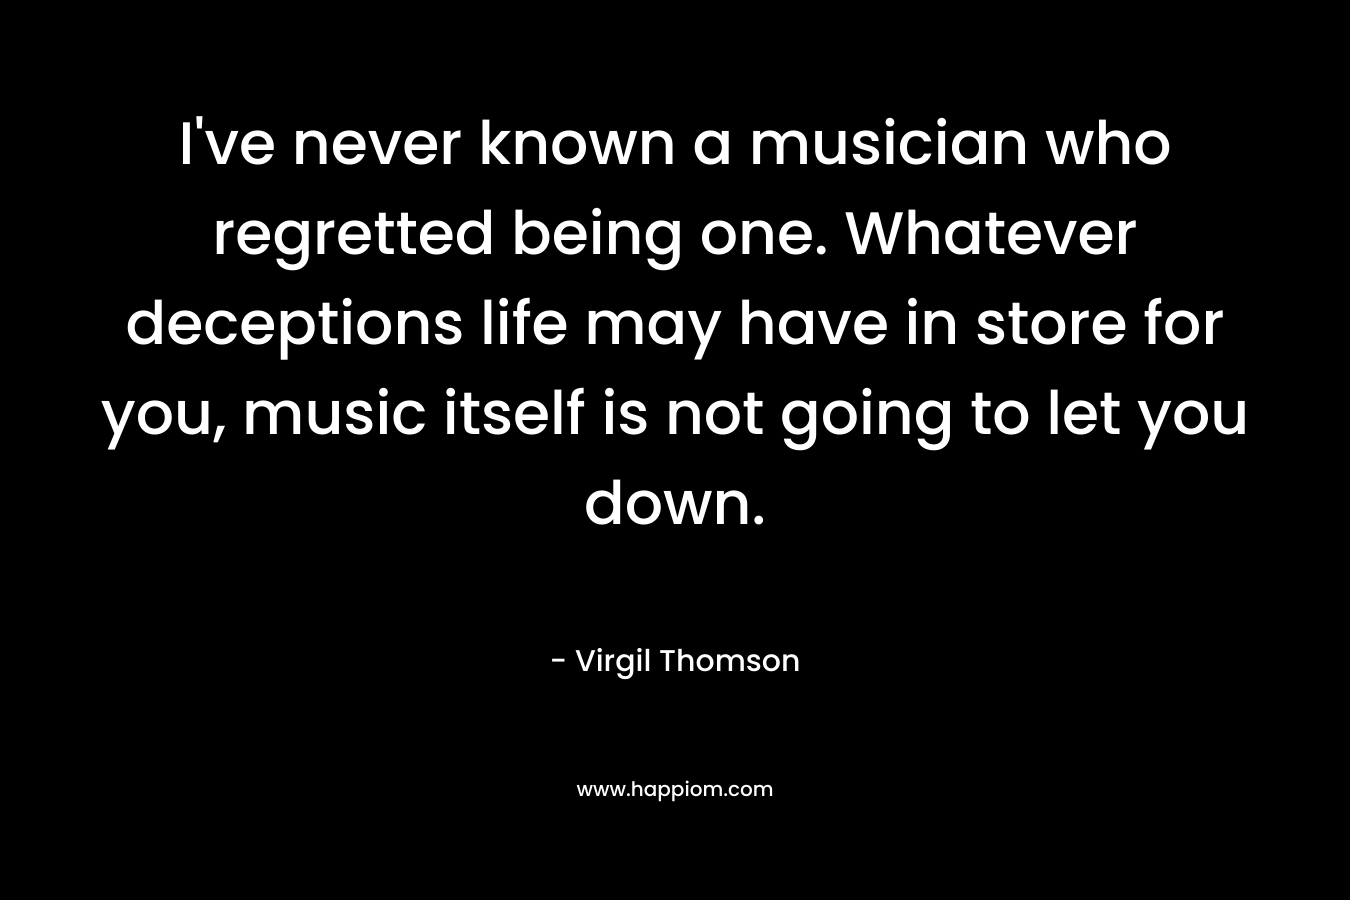 I’ve never known a musician who regretted being one. Whatever deceptions life may have in store for you, music itself is not going to let you down. – Virgil Thomson